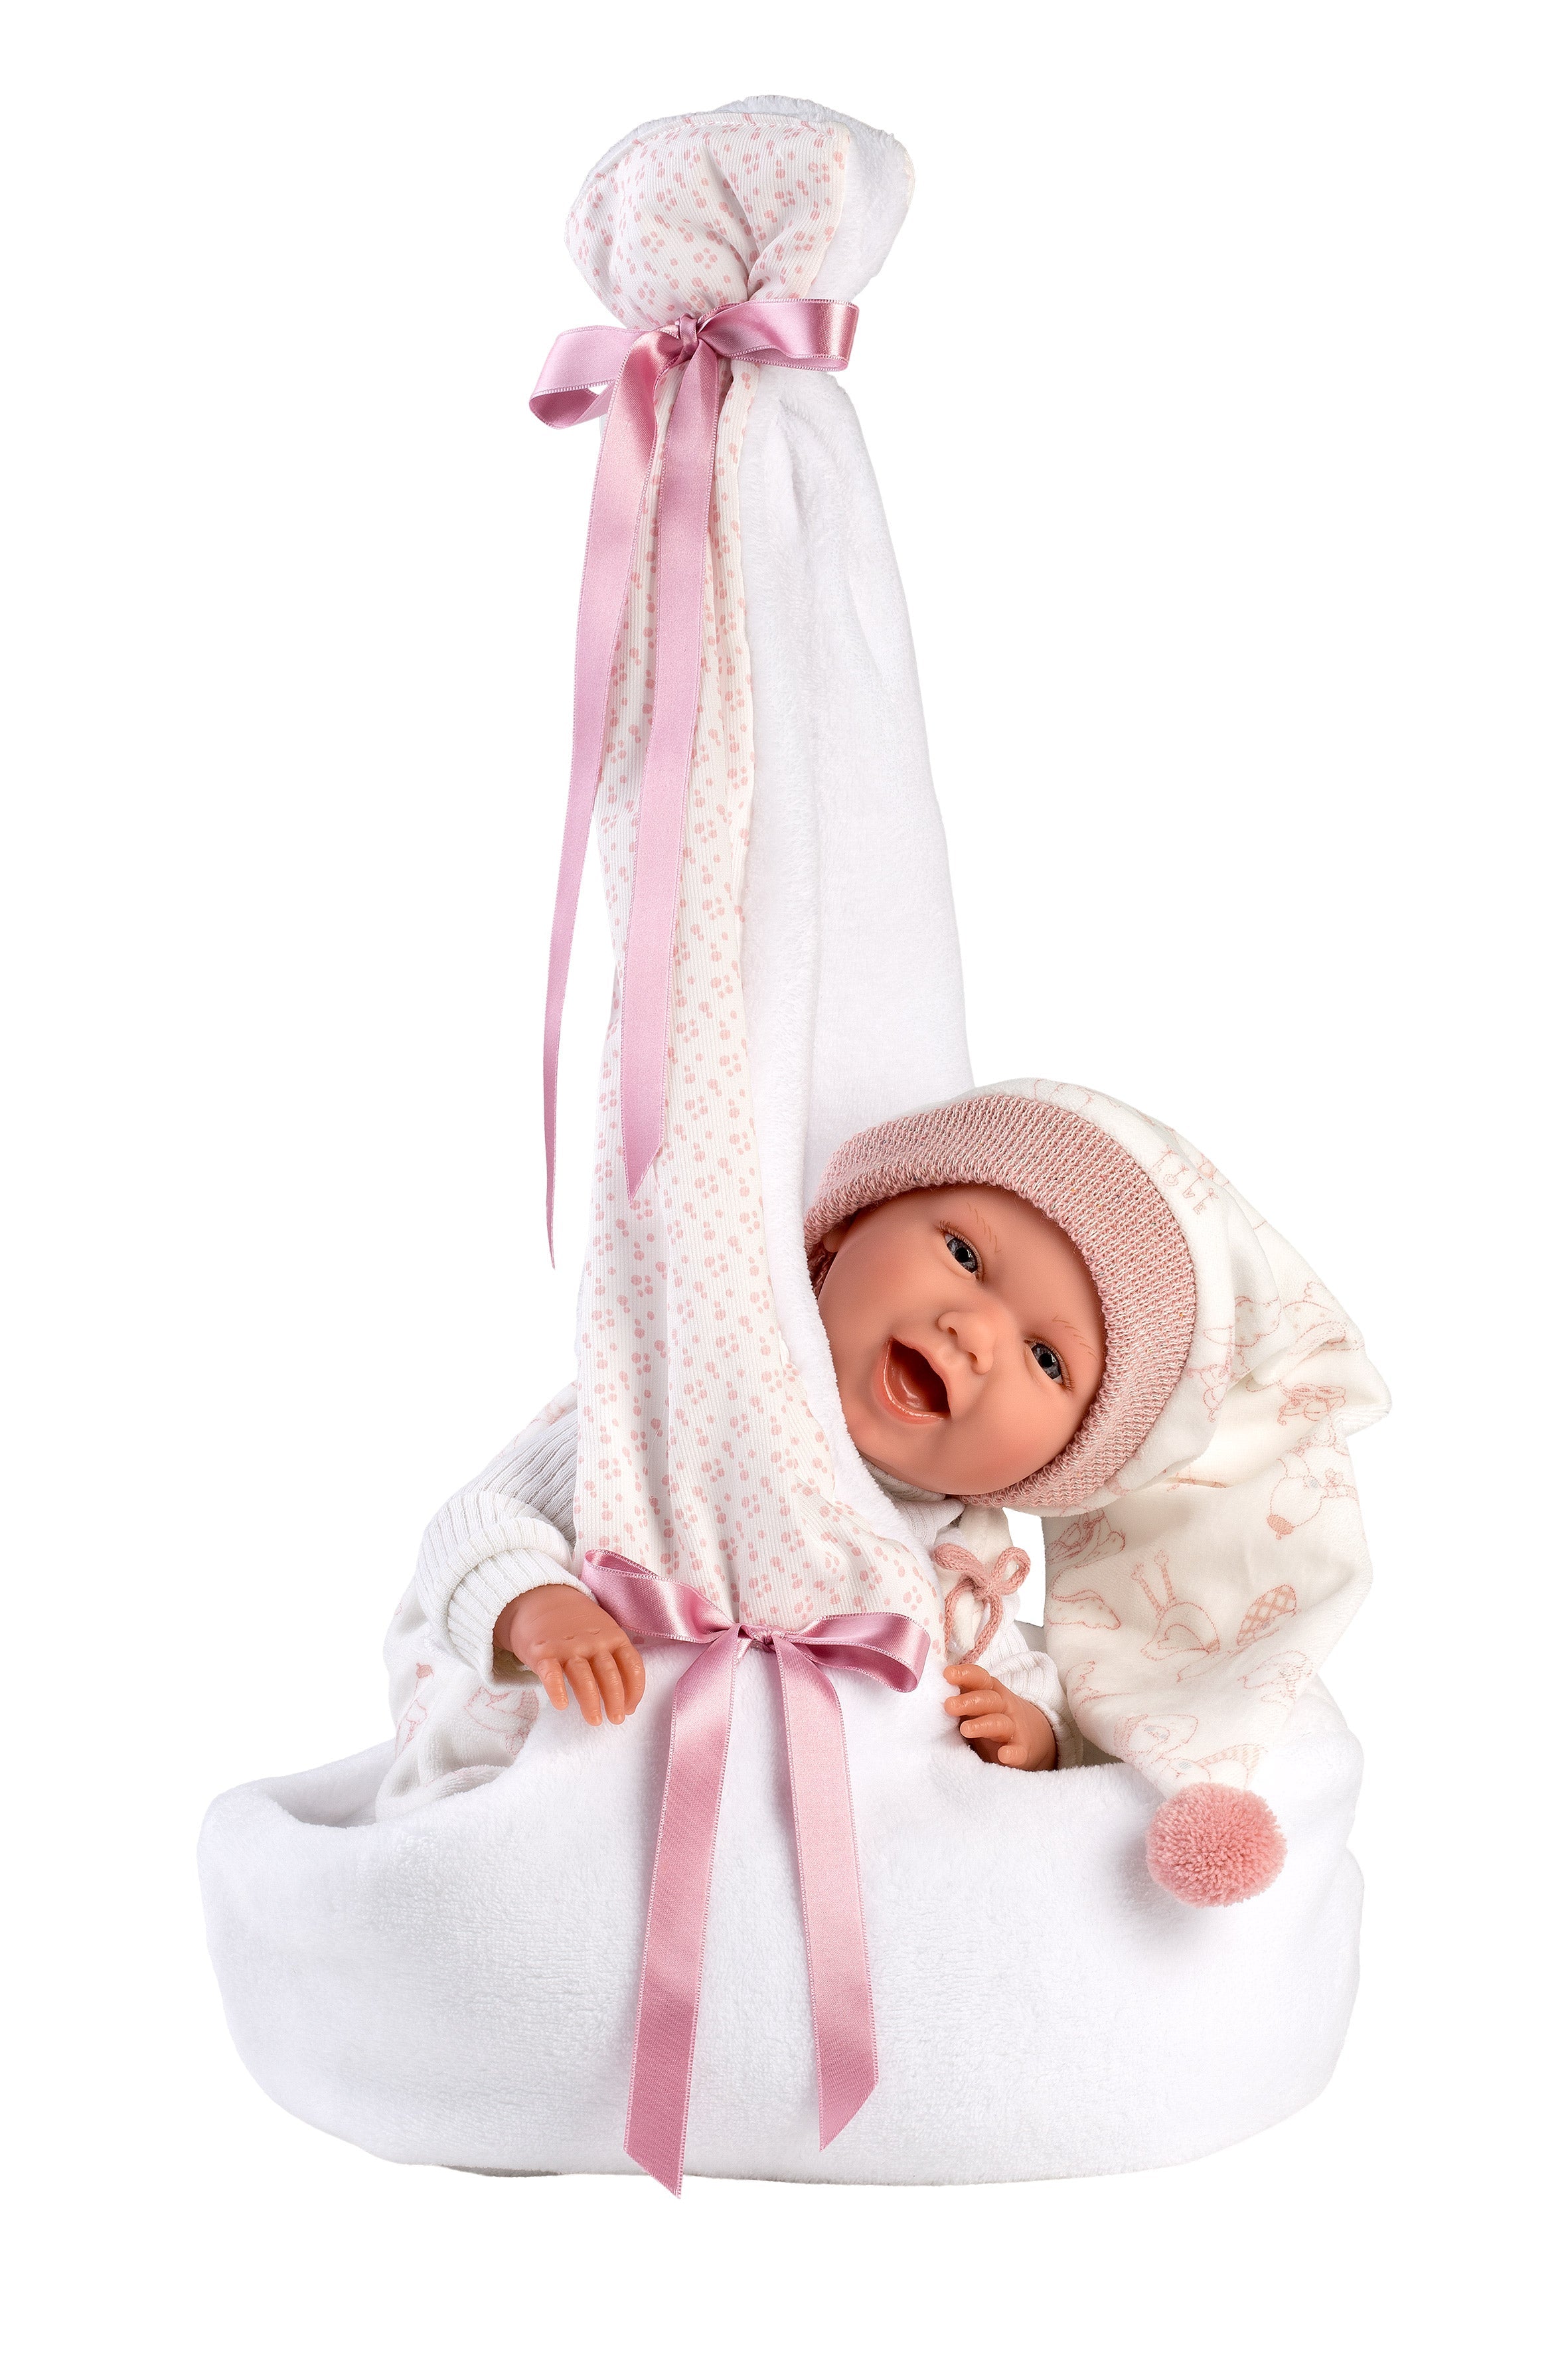 Llorens 16.5" Articulated New Born Natalia With Carrycot Dolls